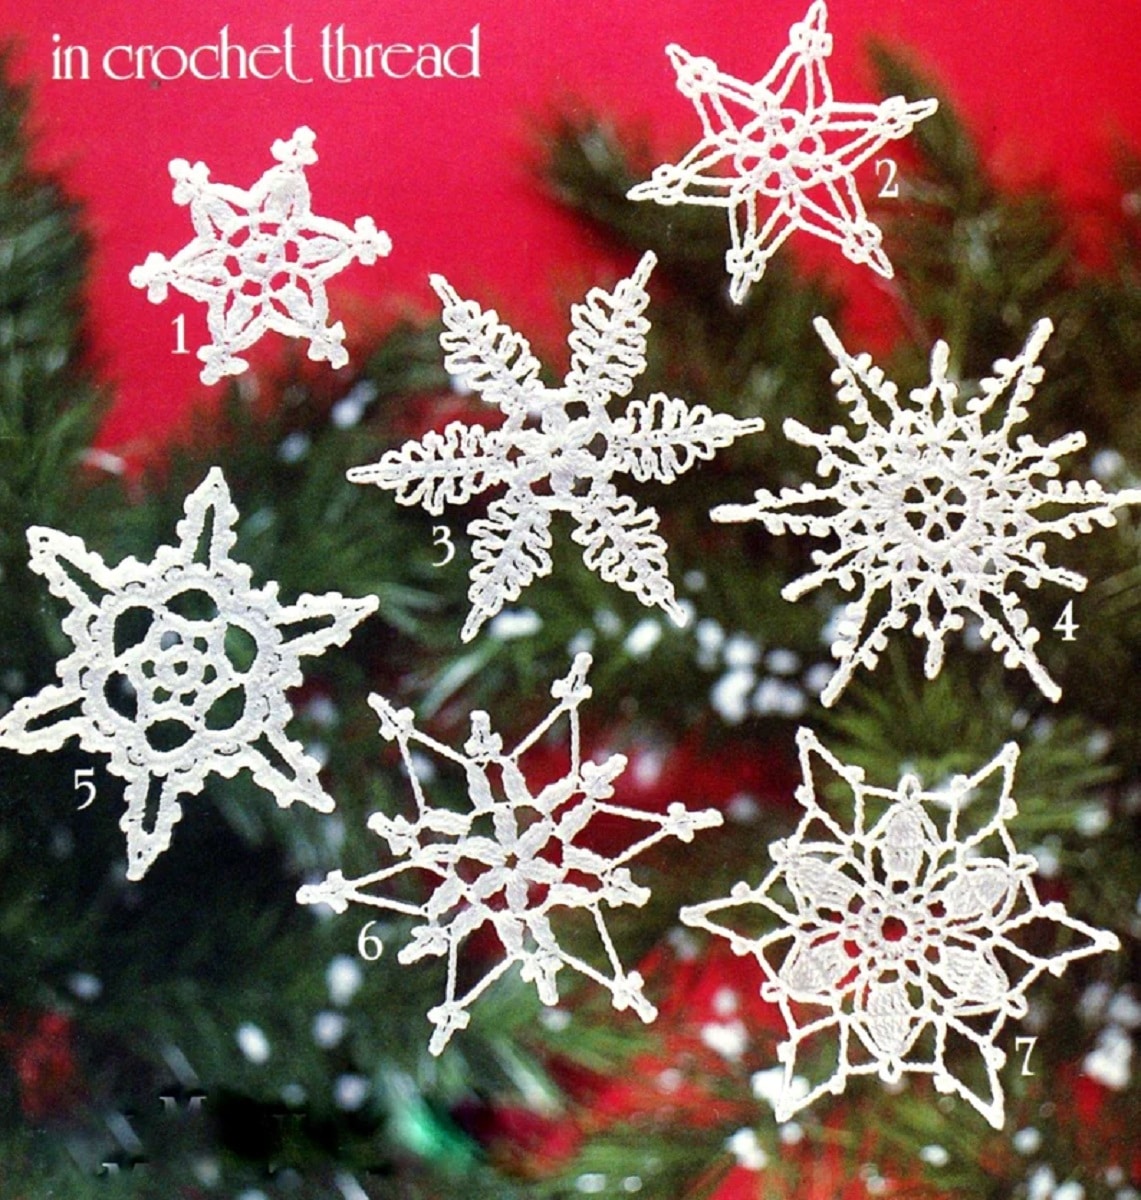 Several white vintage style crochet snowflakes in front of a blurry Christmas tree and red background.